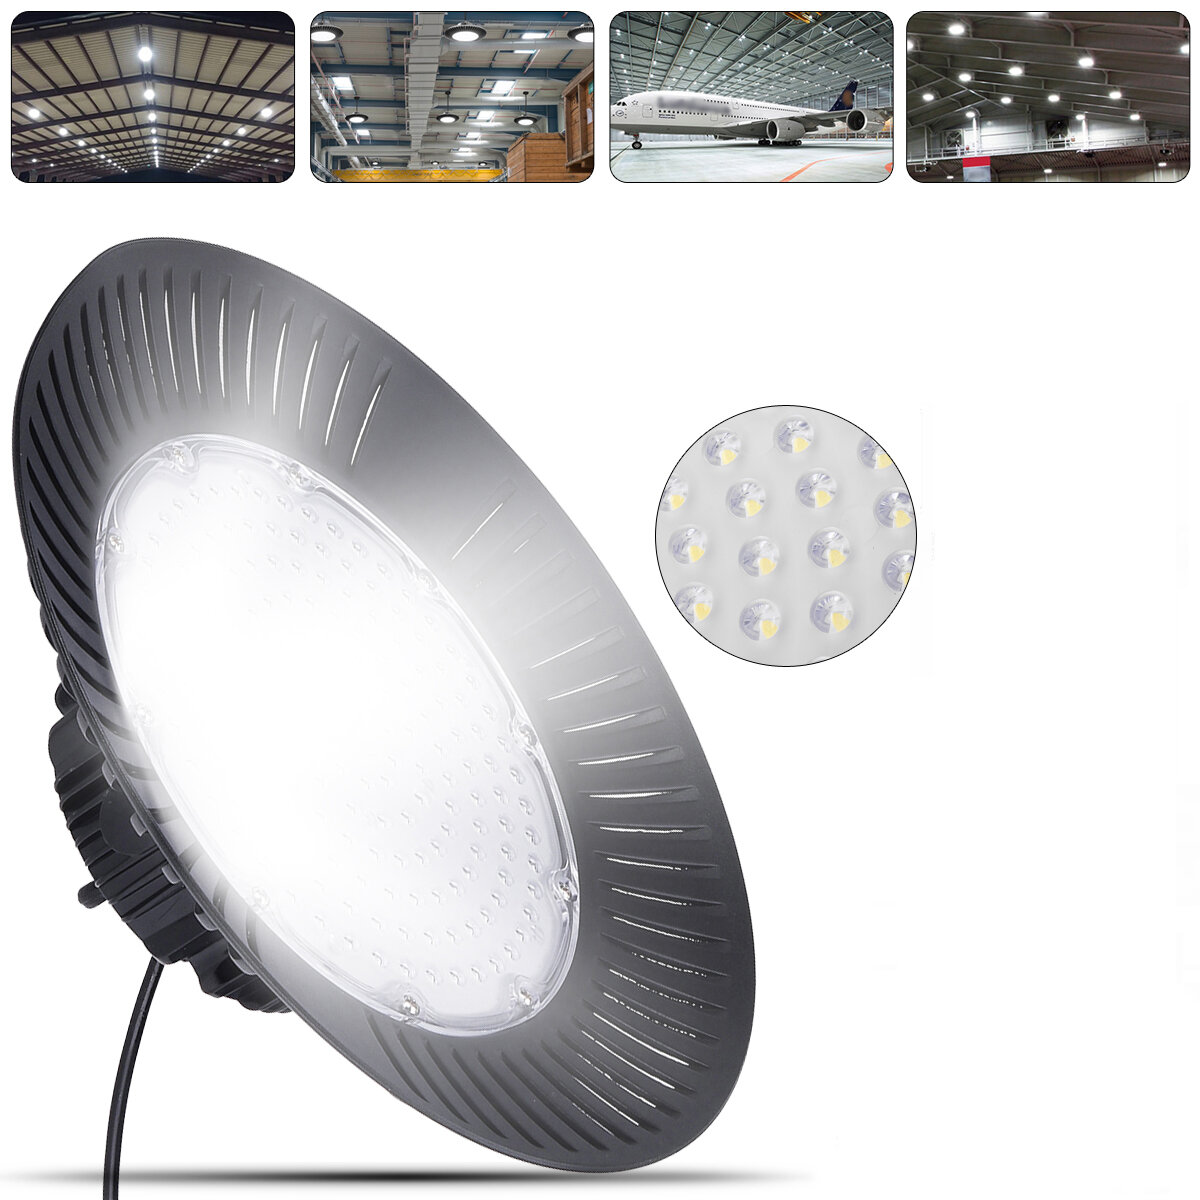 100W/150W /200W UFO LED High Bay Light 220V 1.5M AU Plug Cable Warehouse Industrial Shed Workshop Factory Lamp With 30CM